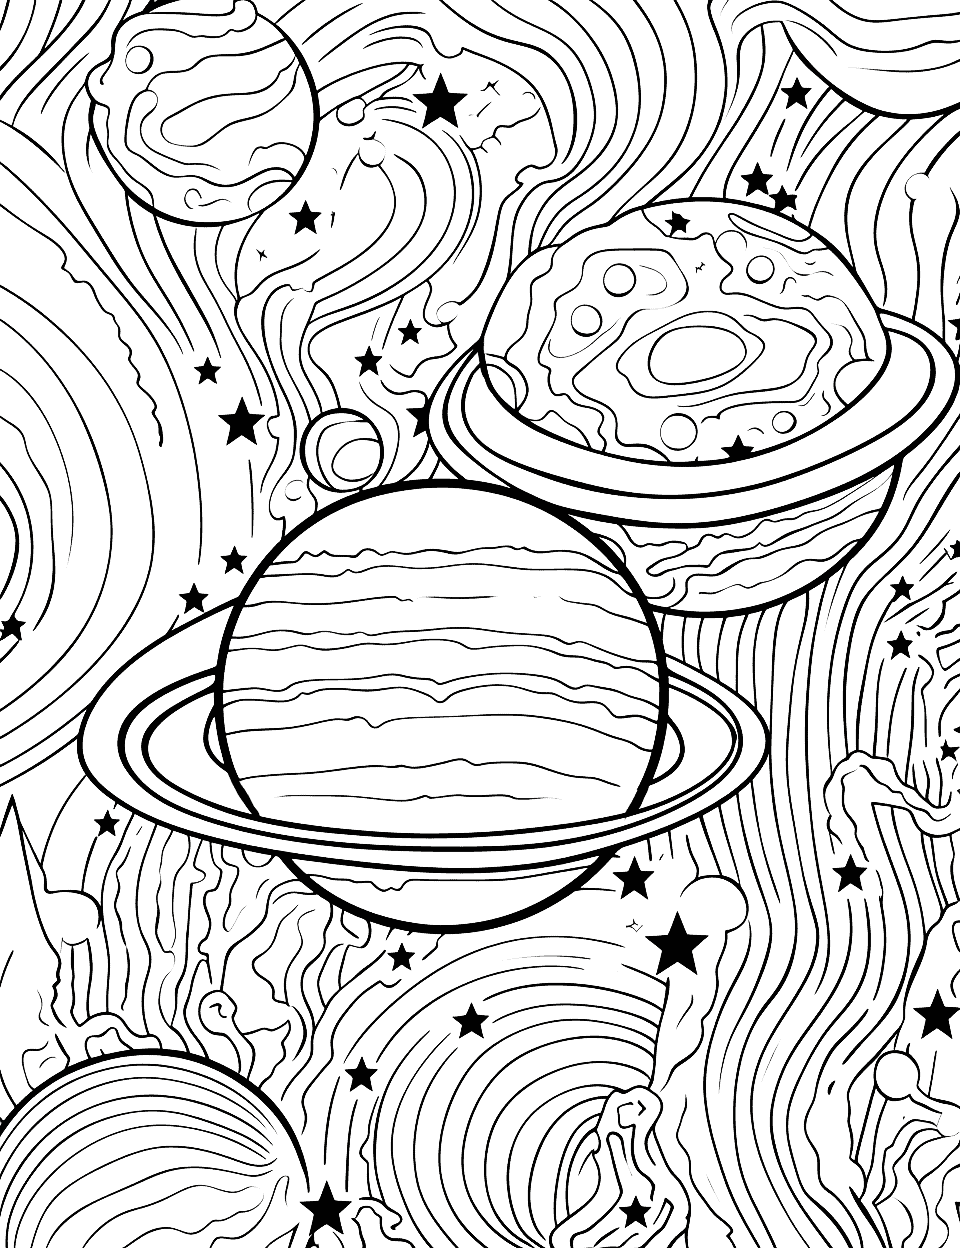 Outer Space Adventure Adult Coloring Page - A coloring page filled with outer space elements like intricate stars, detailed planets, and swirling galaxies.